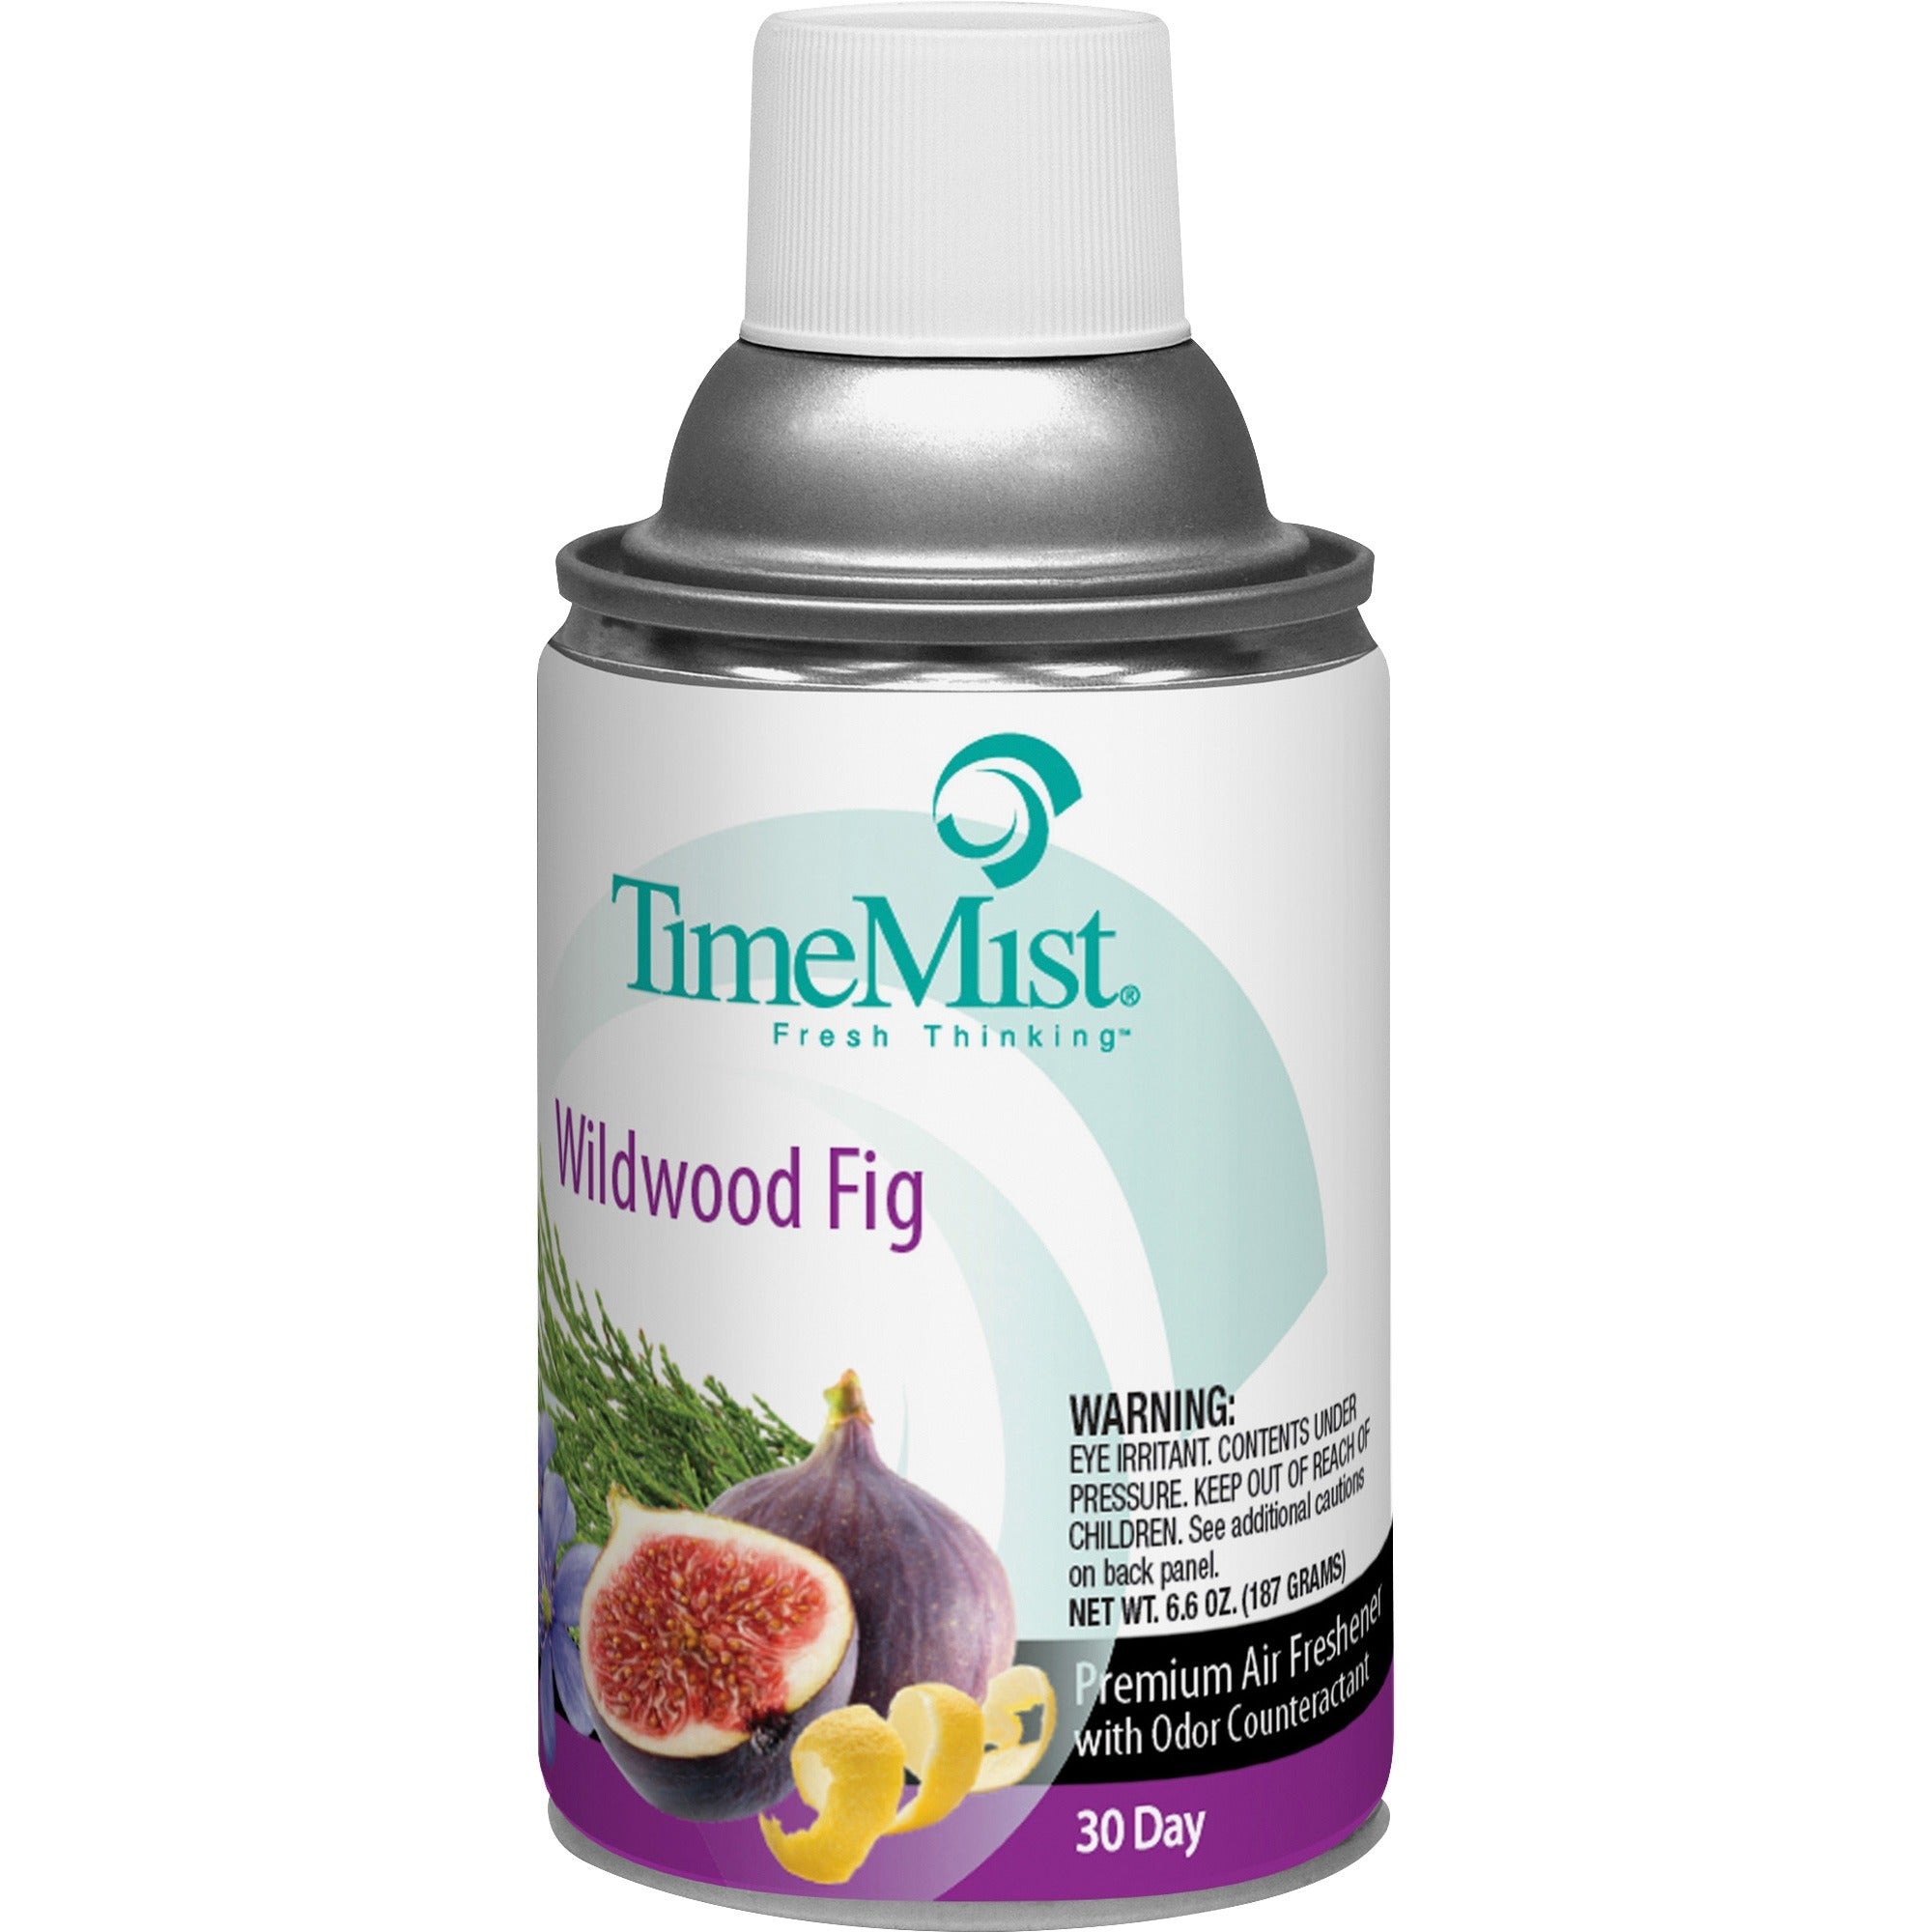 timemist-metered-30-day-wildwood-fig-scent-refill-spray-6000-ft-66-fl-oz-02-quart-wildwood-fig-30-day-12-carton-odor-neutralizer-long-lasting_tms1048493ct - 2